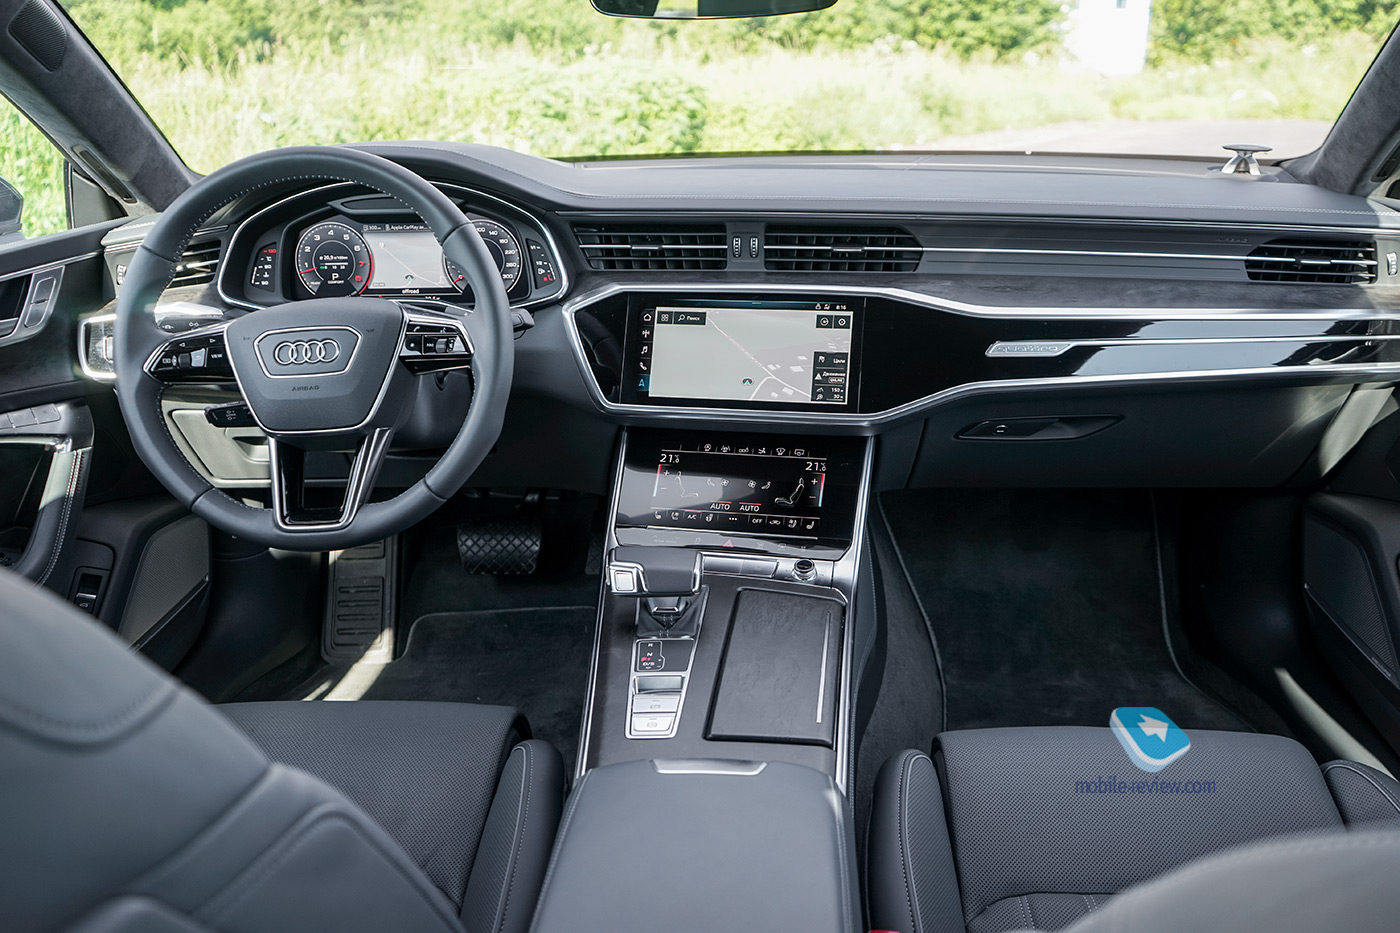 Audi A7 Sportback test. Between sedan and coupe